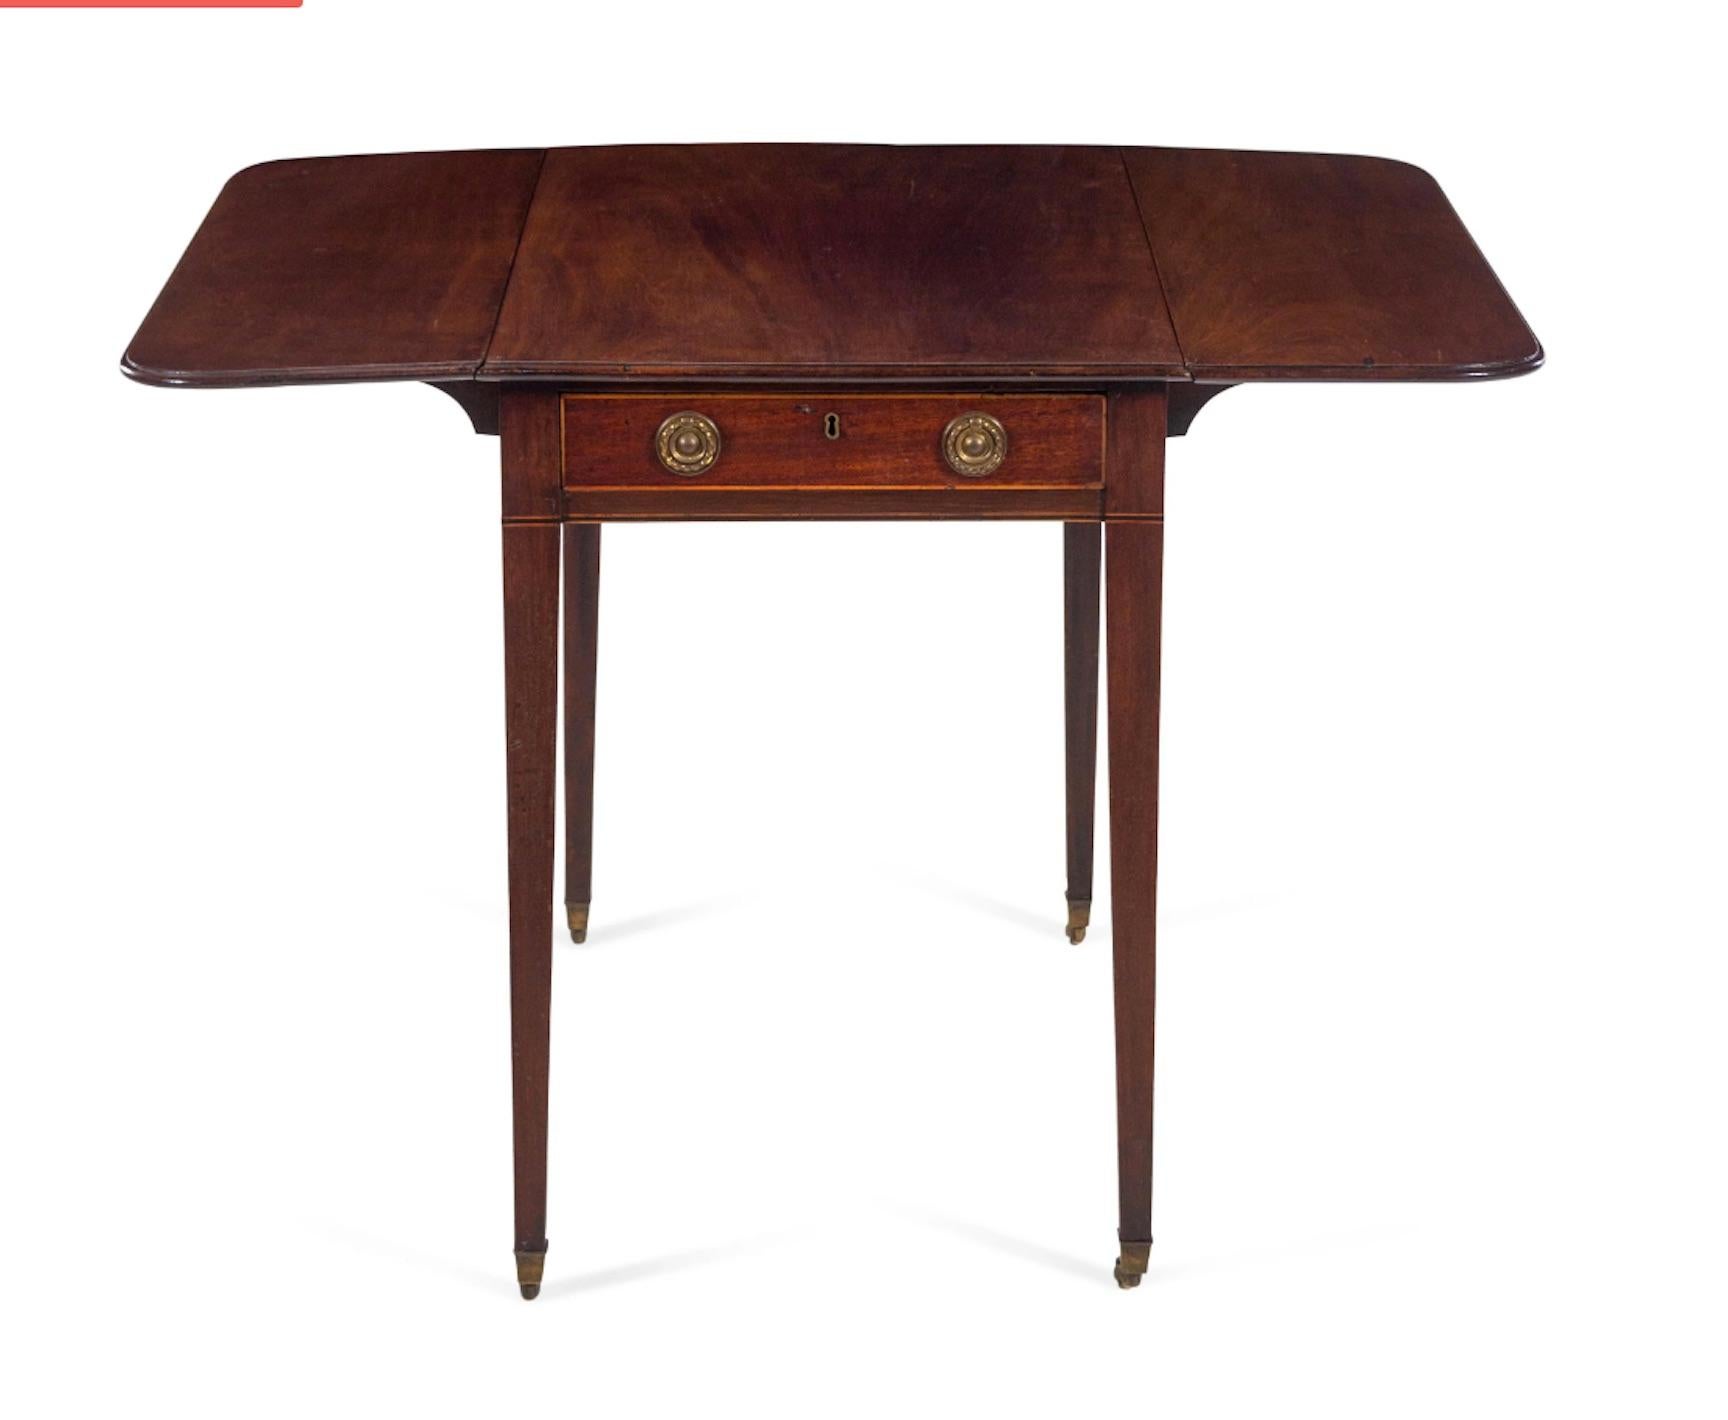 A 19th century Geo III mahogany Pembroke table with satin wood inlay.
Measures: Height 27 1/4 x width 19 1/2 (closed) x depth 30 inches.